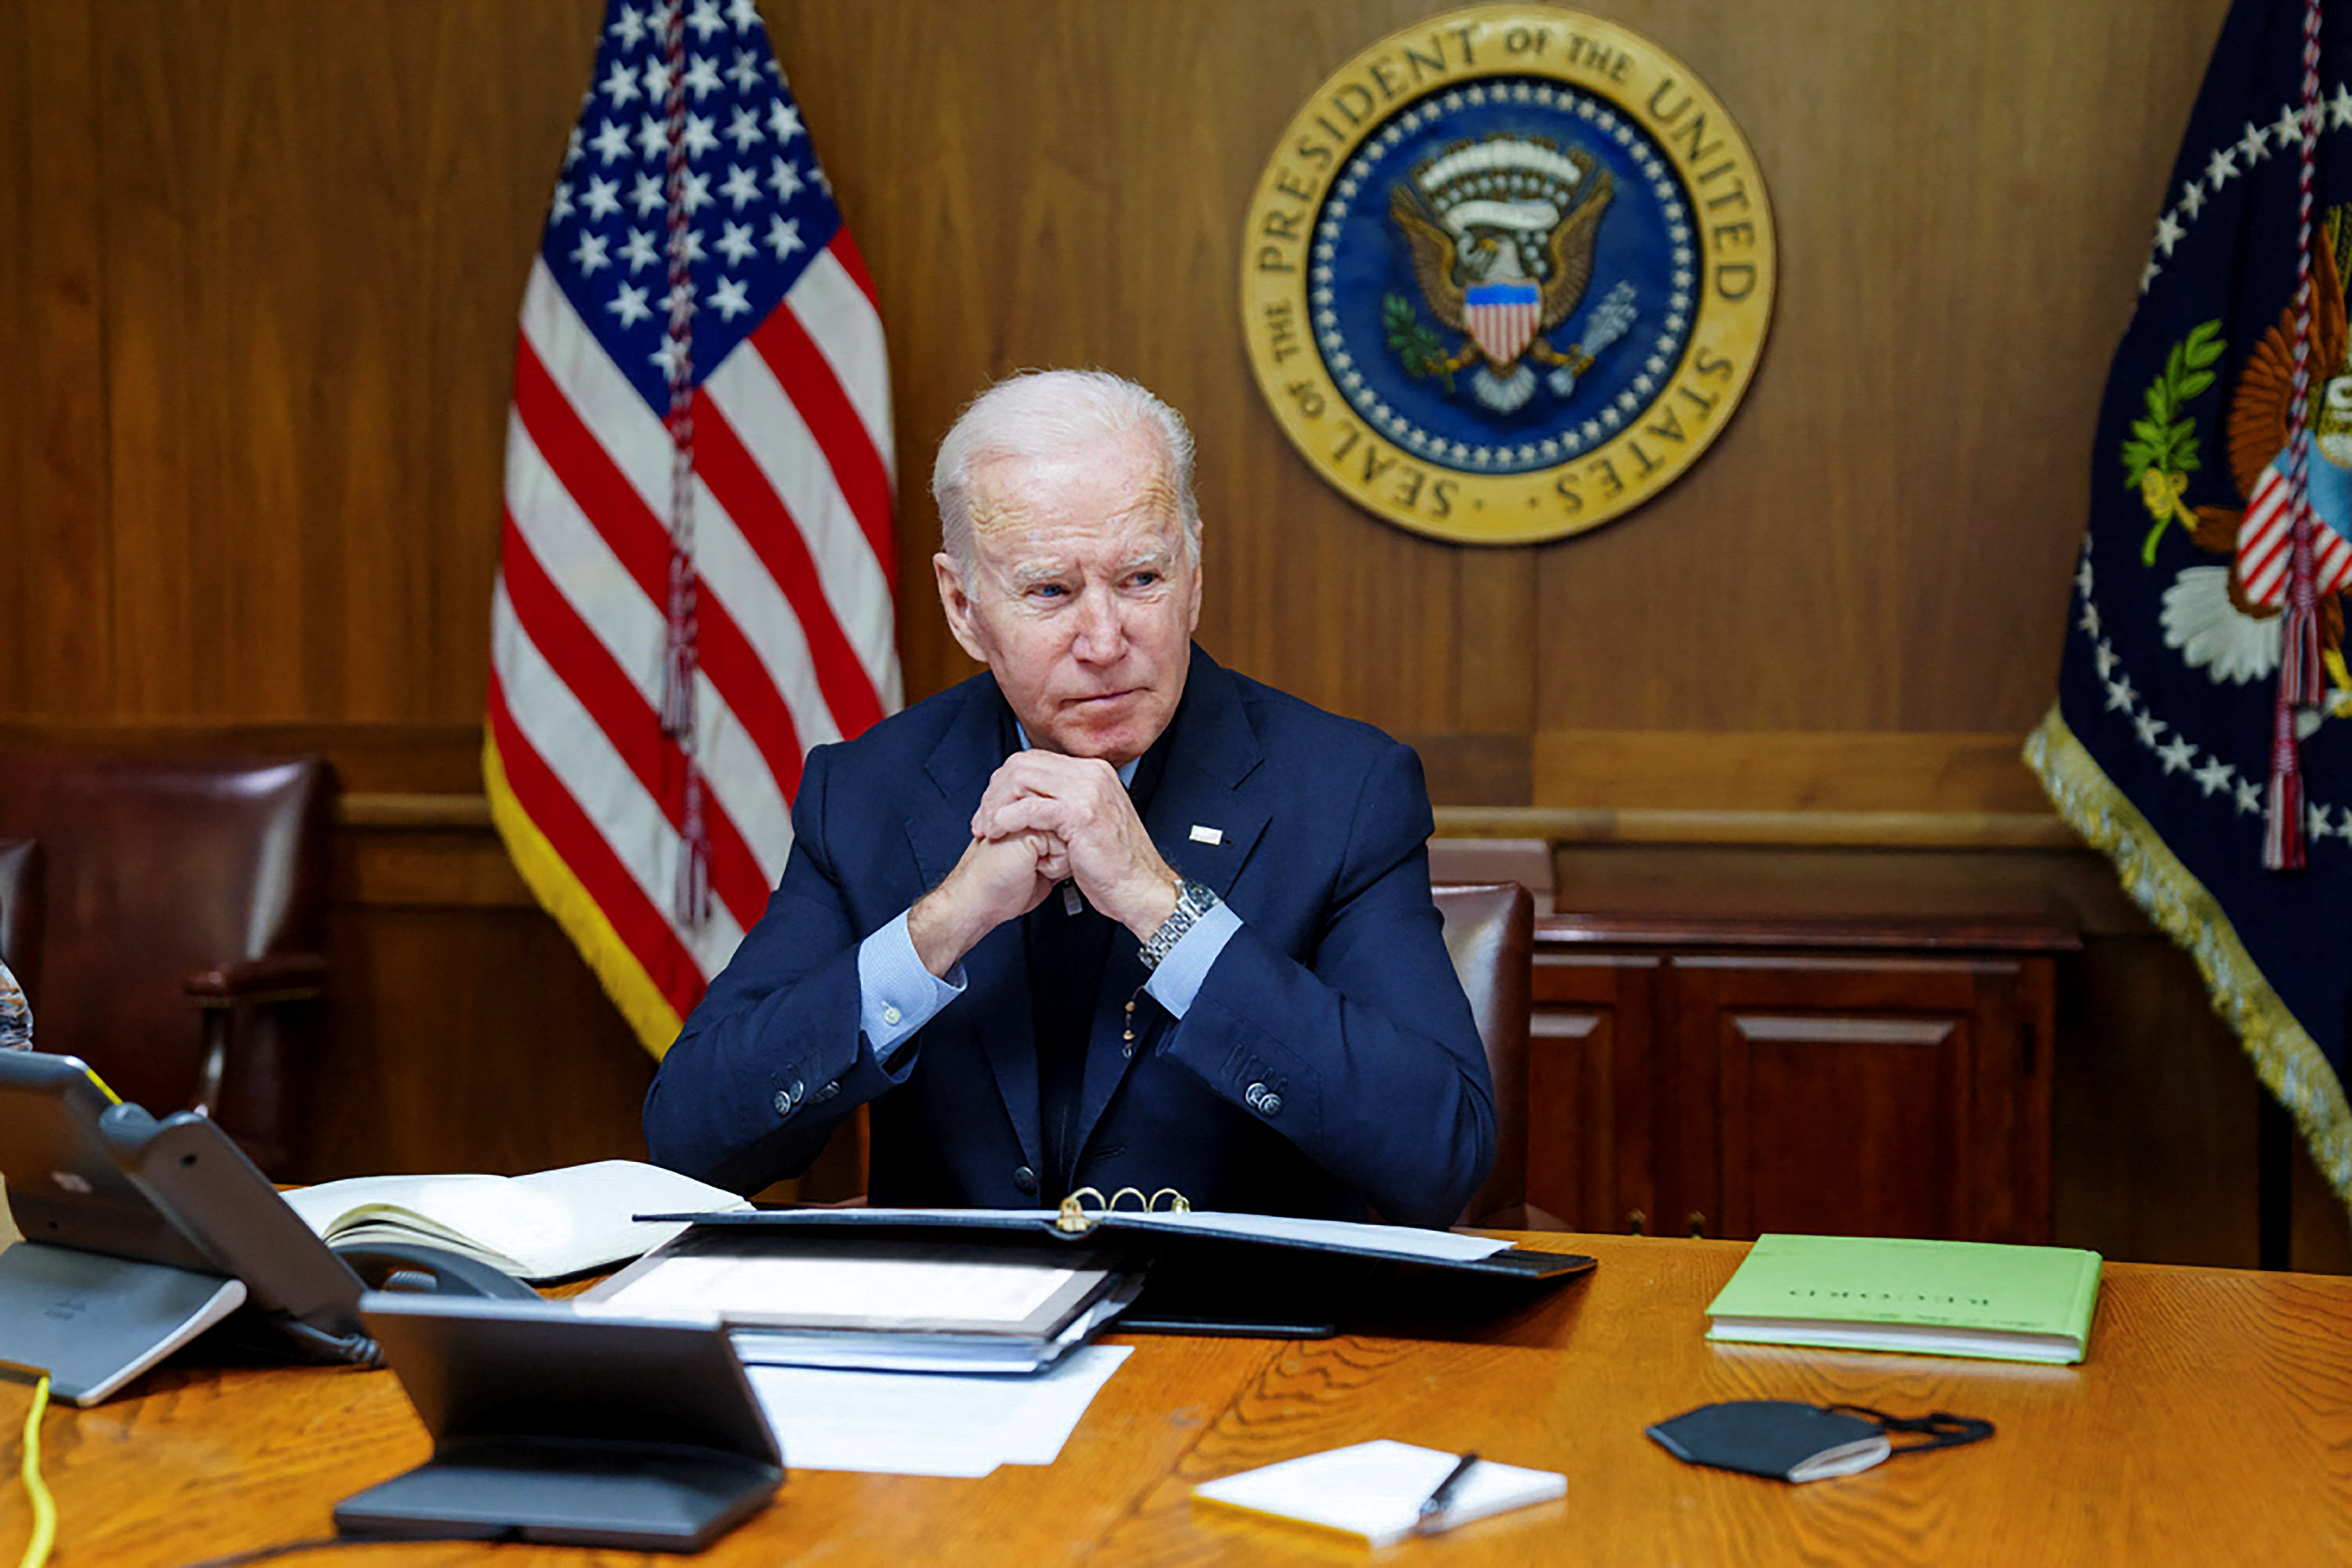 U.S. President Biden speaks by phone with Russia's President Putin from Camp David in Maryland